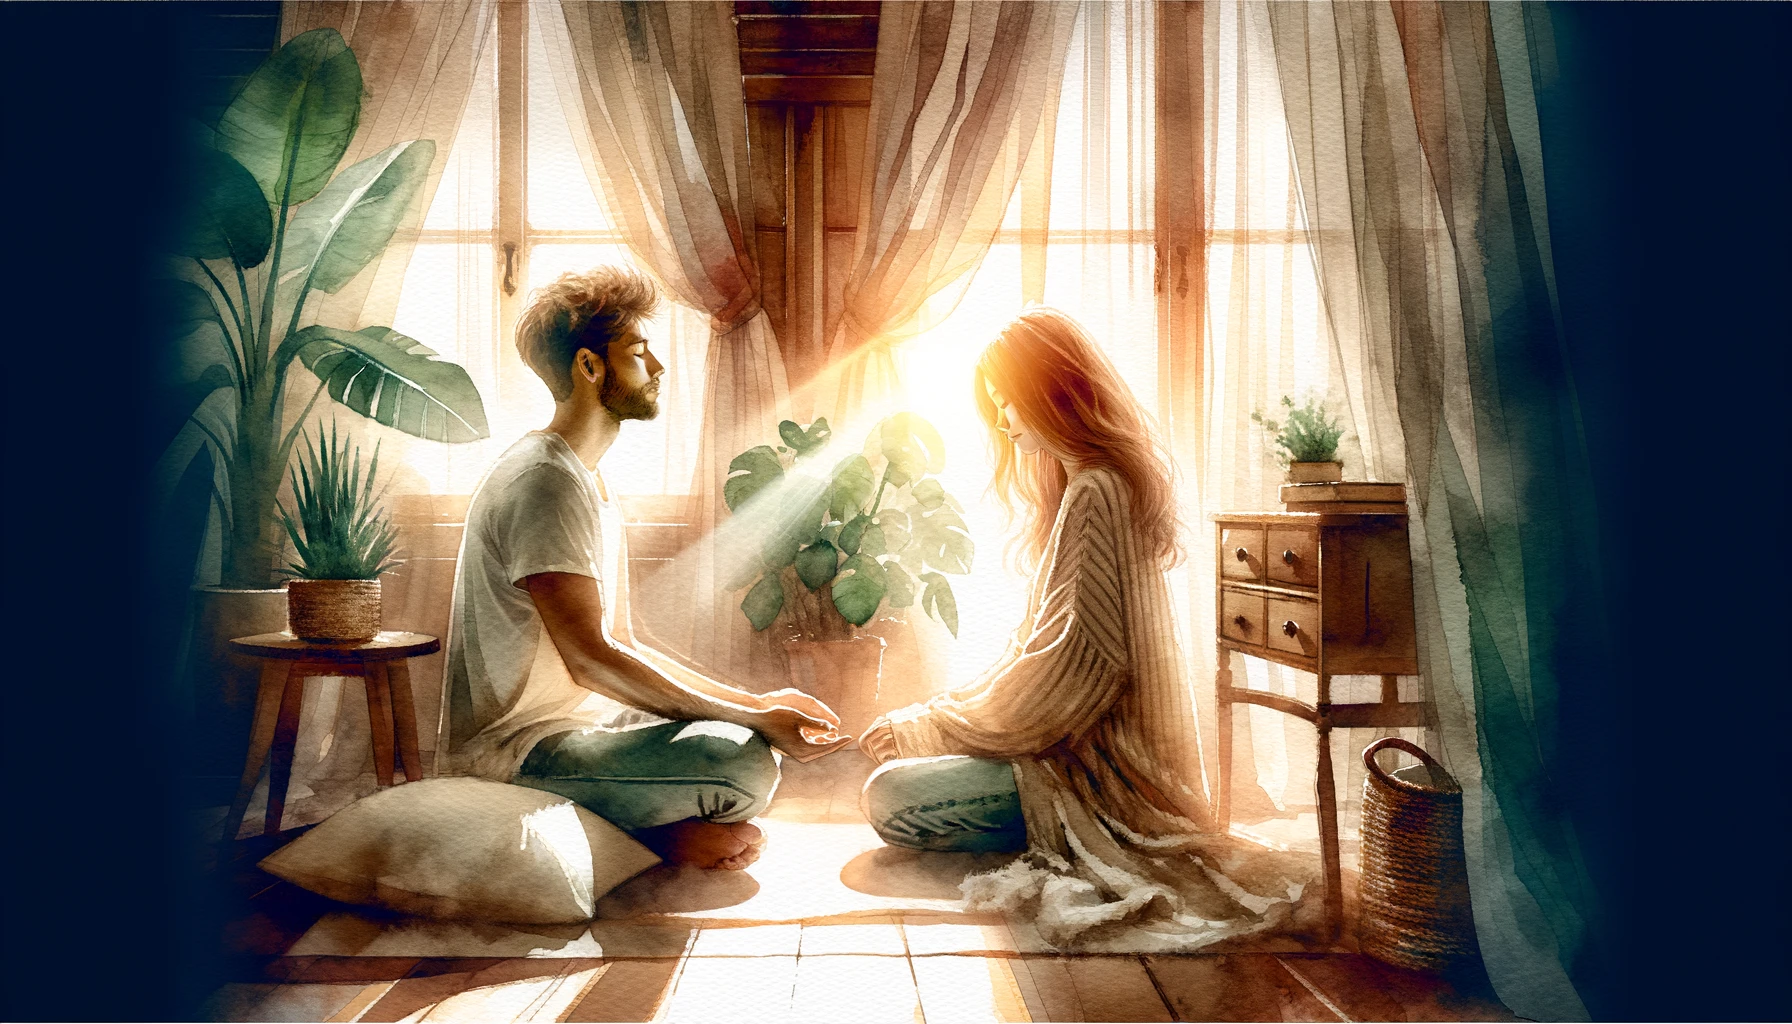 A couple shares a moment of prayer in a sun-drenched living space.